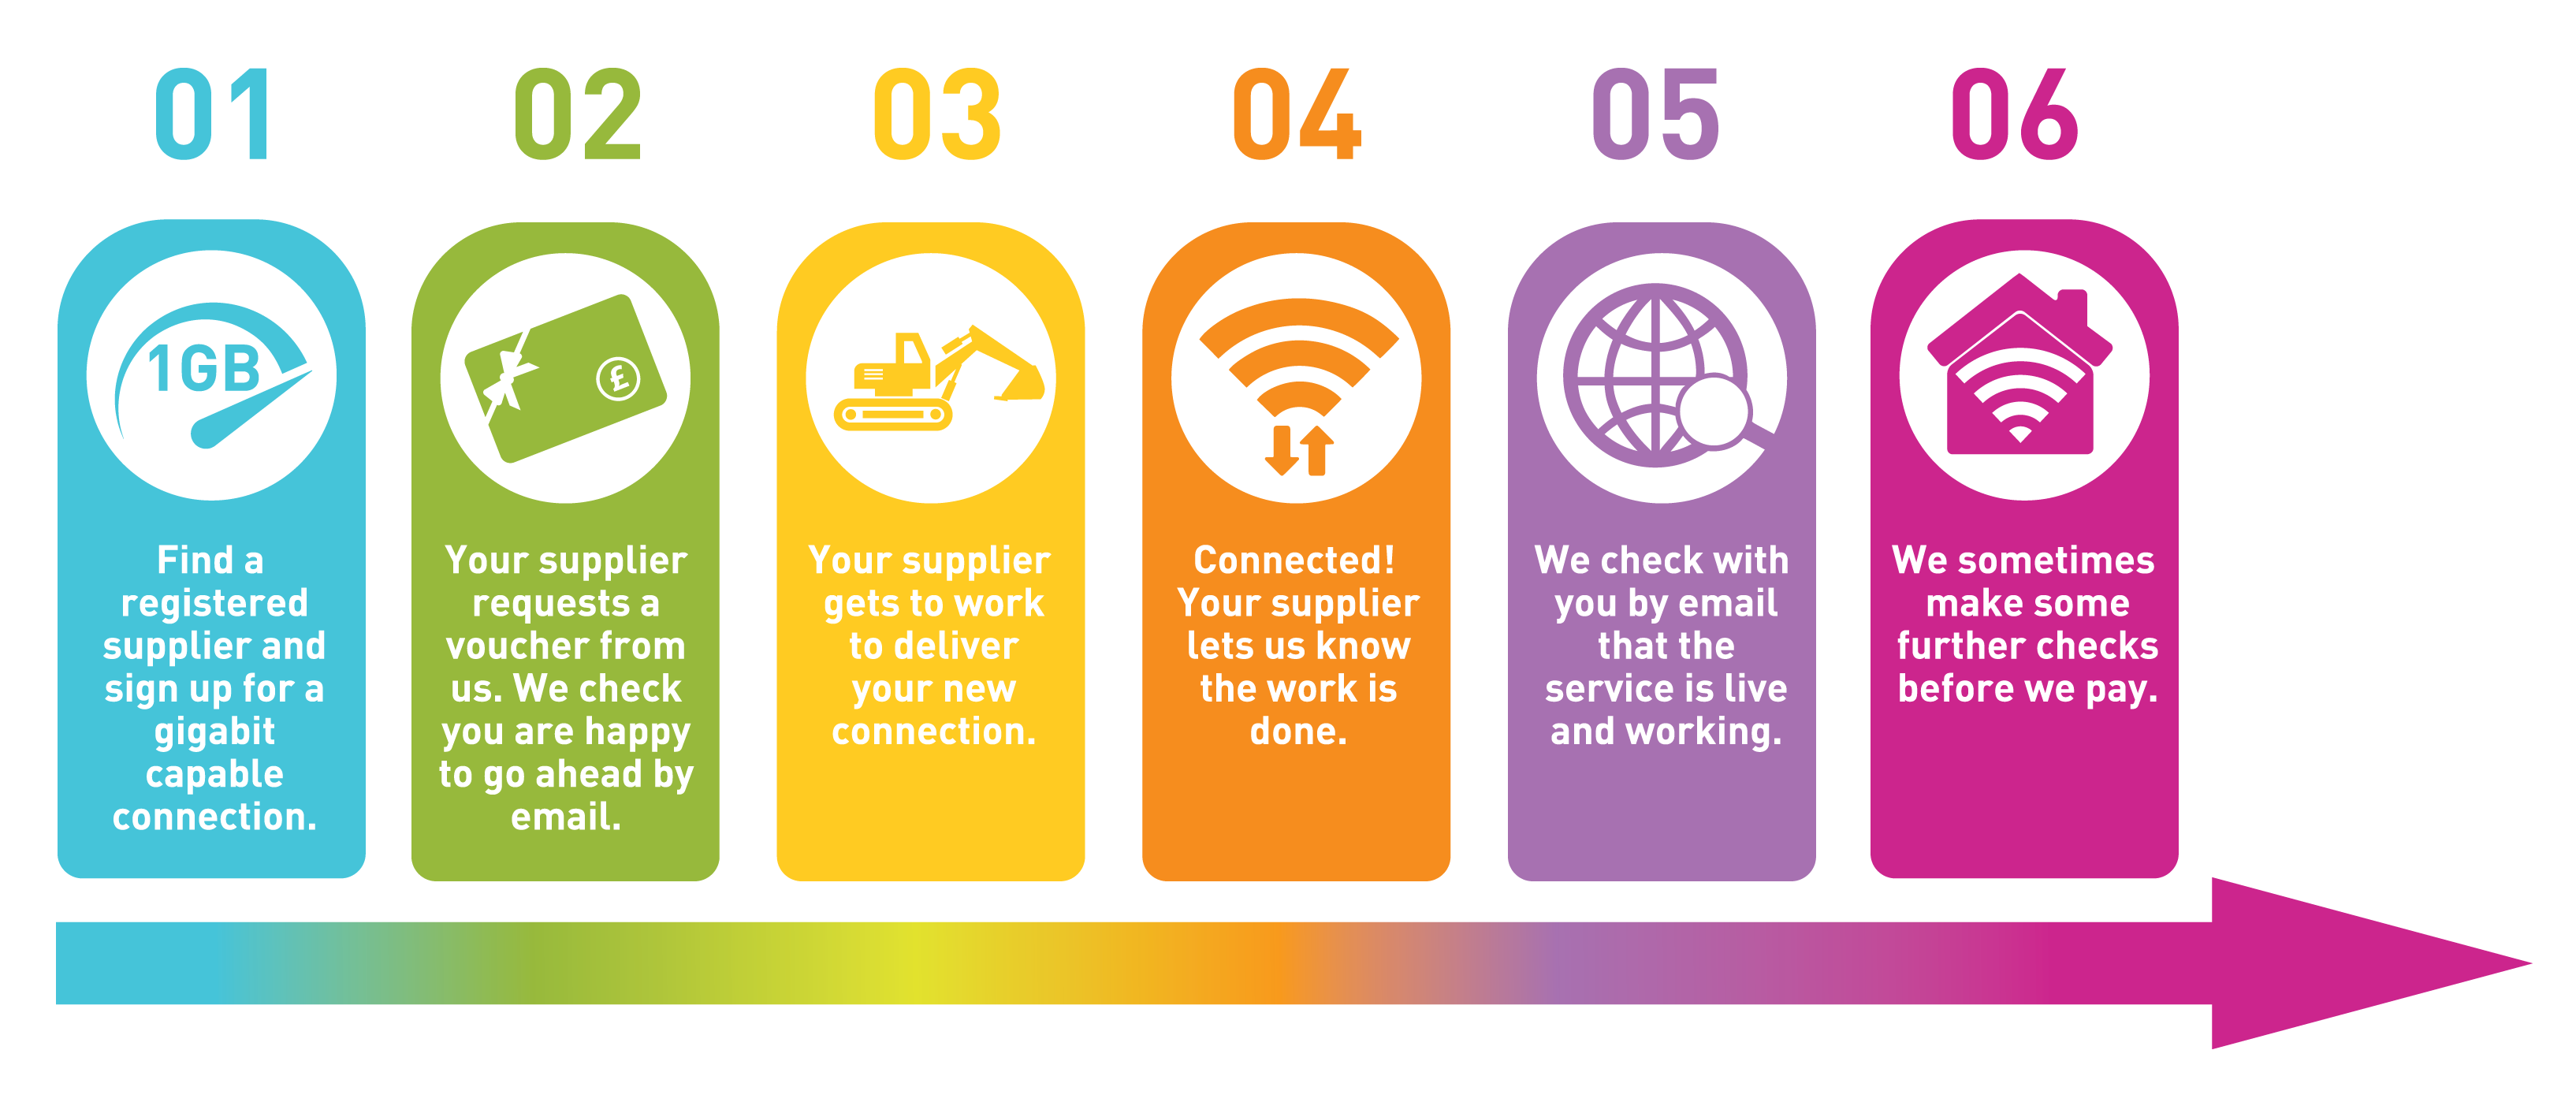 Colourful infographic showing process for rural gigabit funding applications